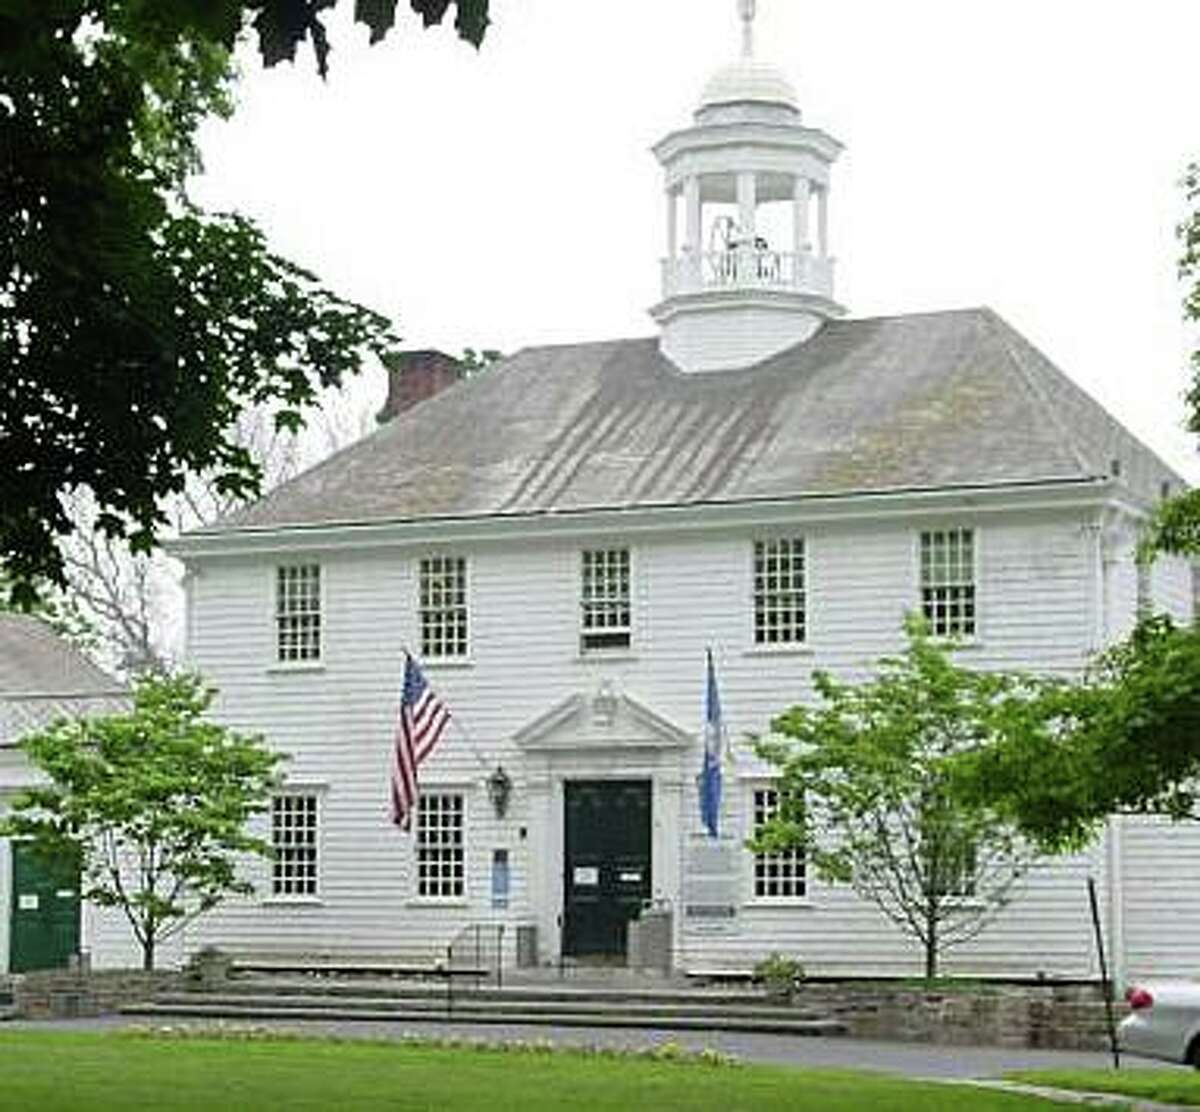 File photo of Fairfield’s Old Town Hall